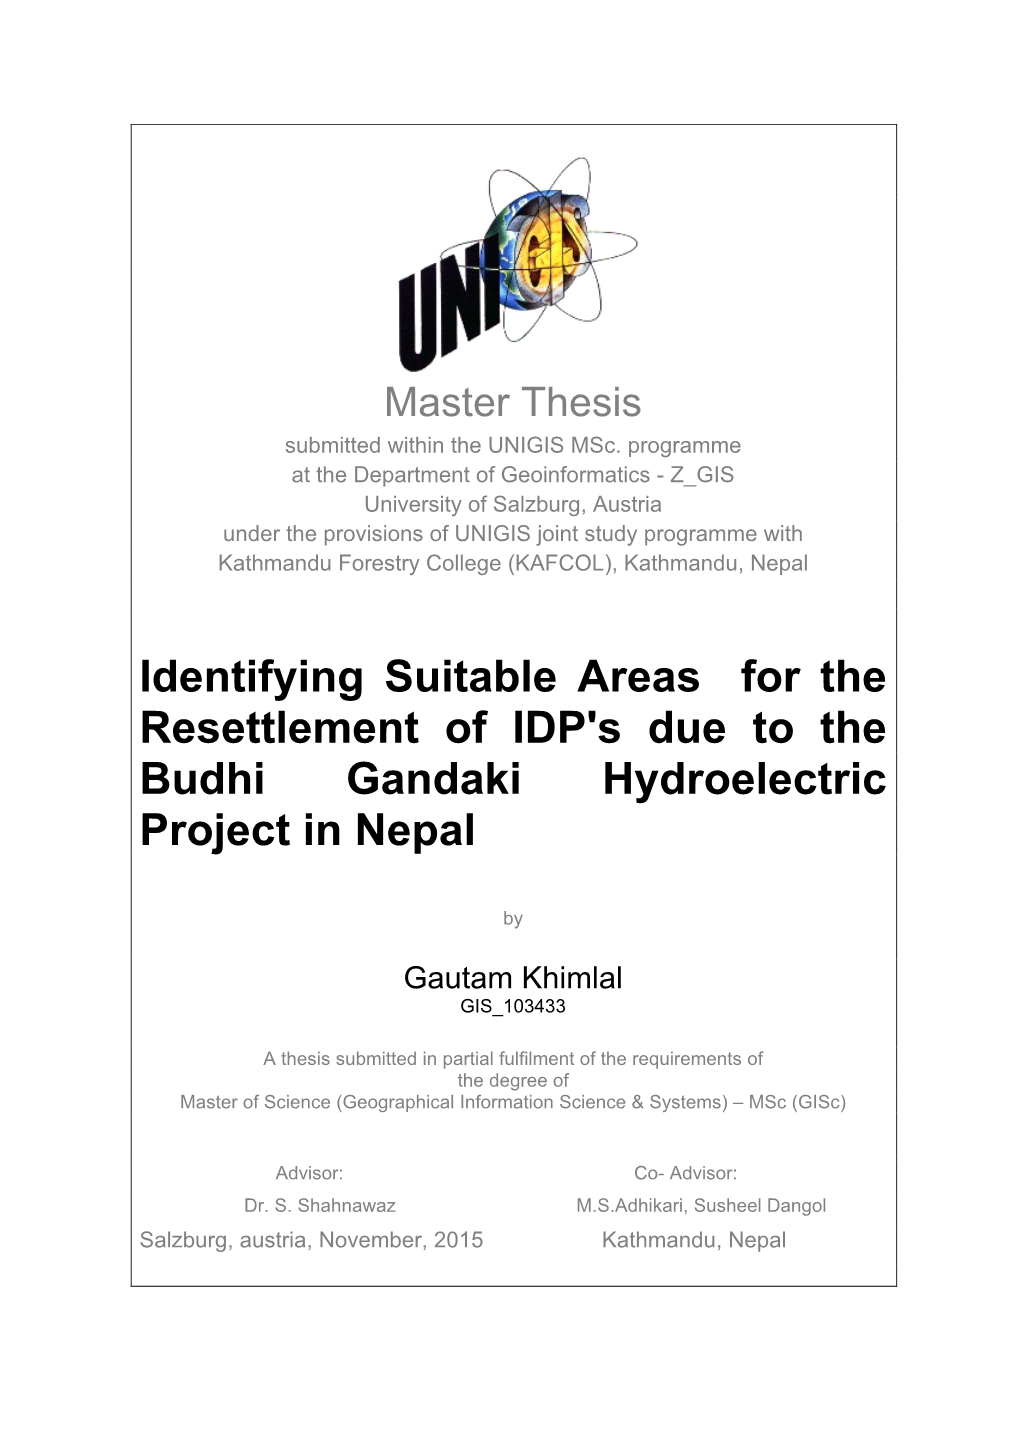 Identifying Suitable Areas for the Resettlement of IDP's Due to the Budhi Gandaki Hydroelectric Project in Nepal